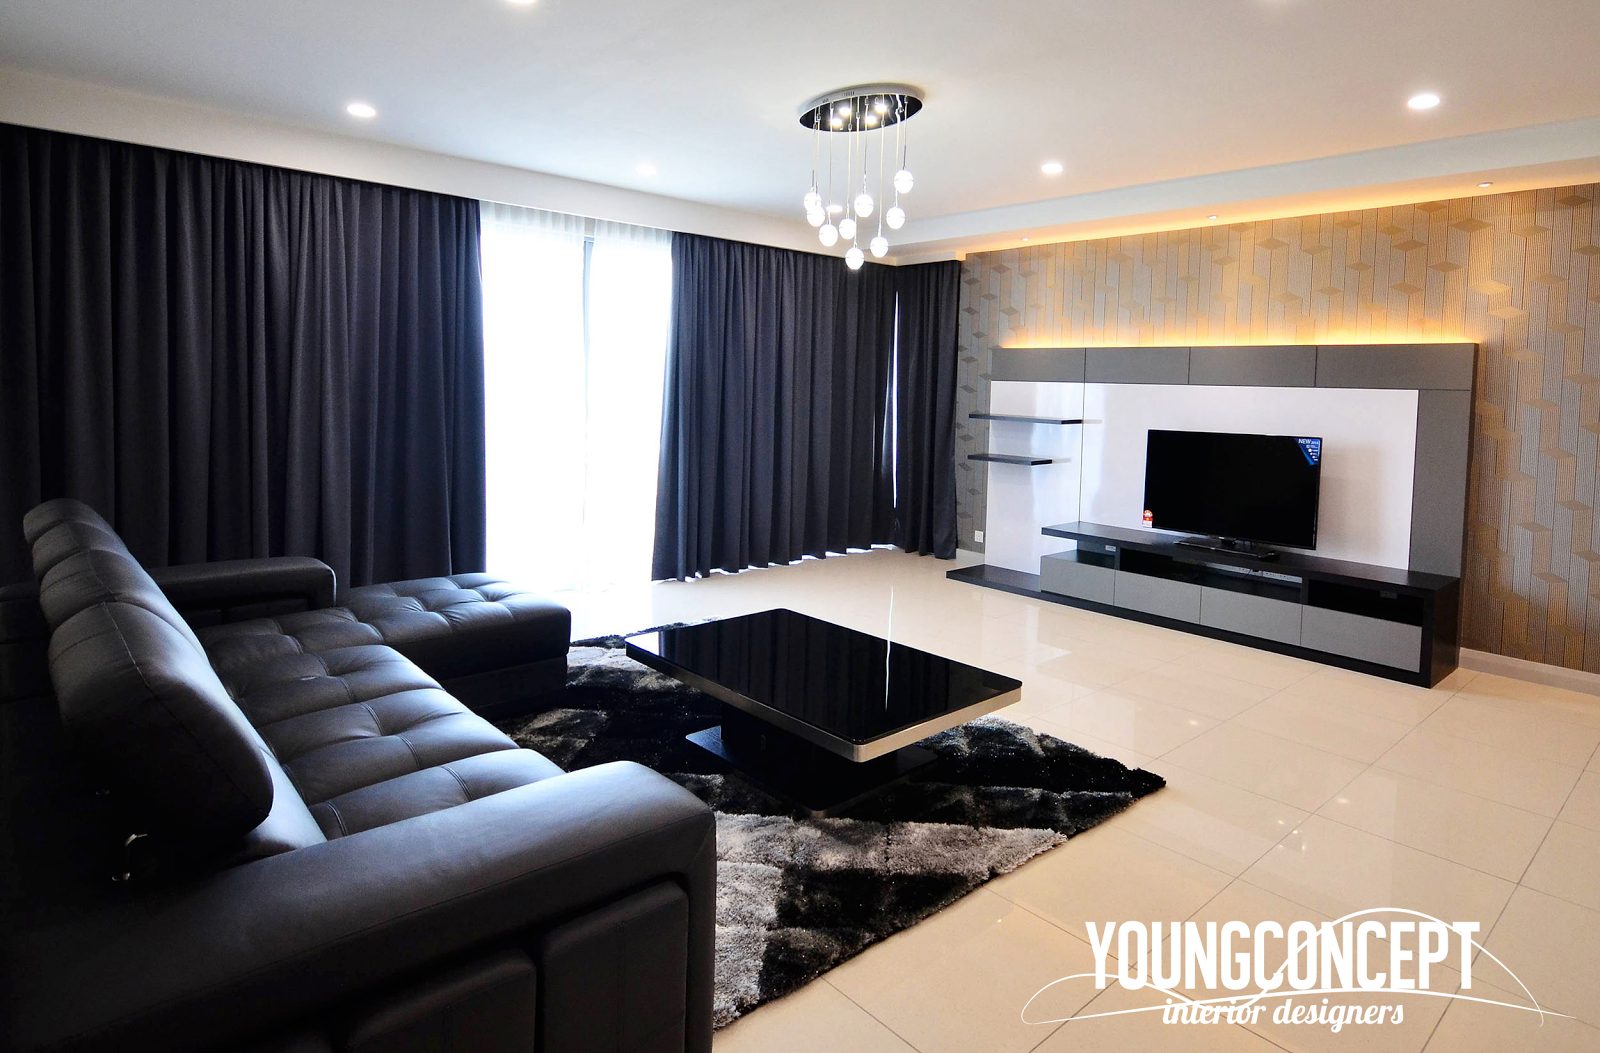 Condominium in Westside 2, Desa Park City. Project by: Young-concept-design-sdn-bhd